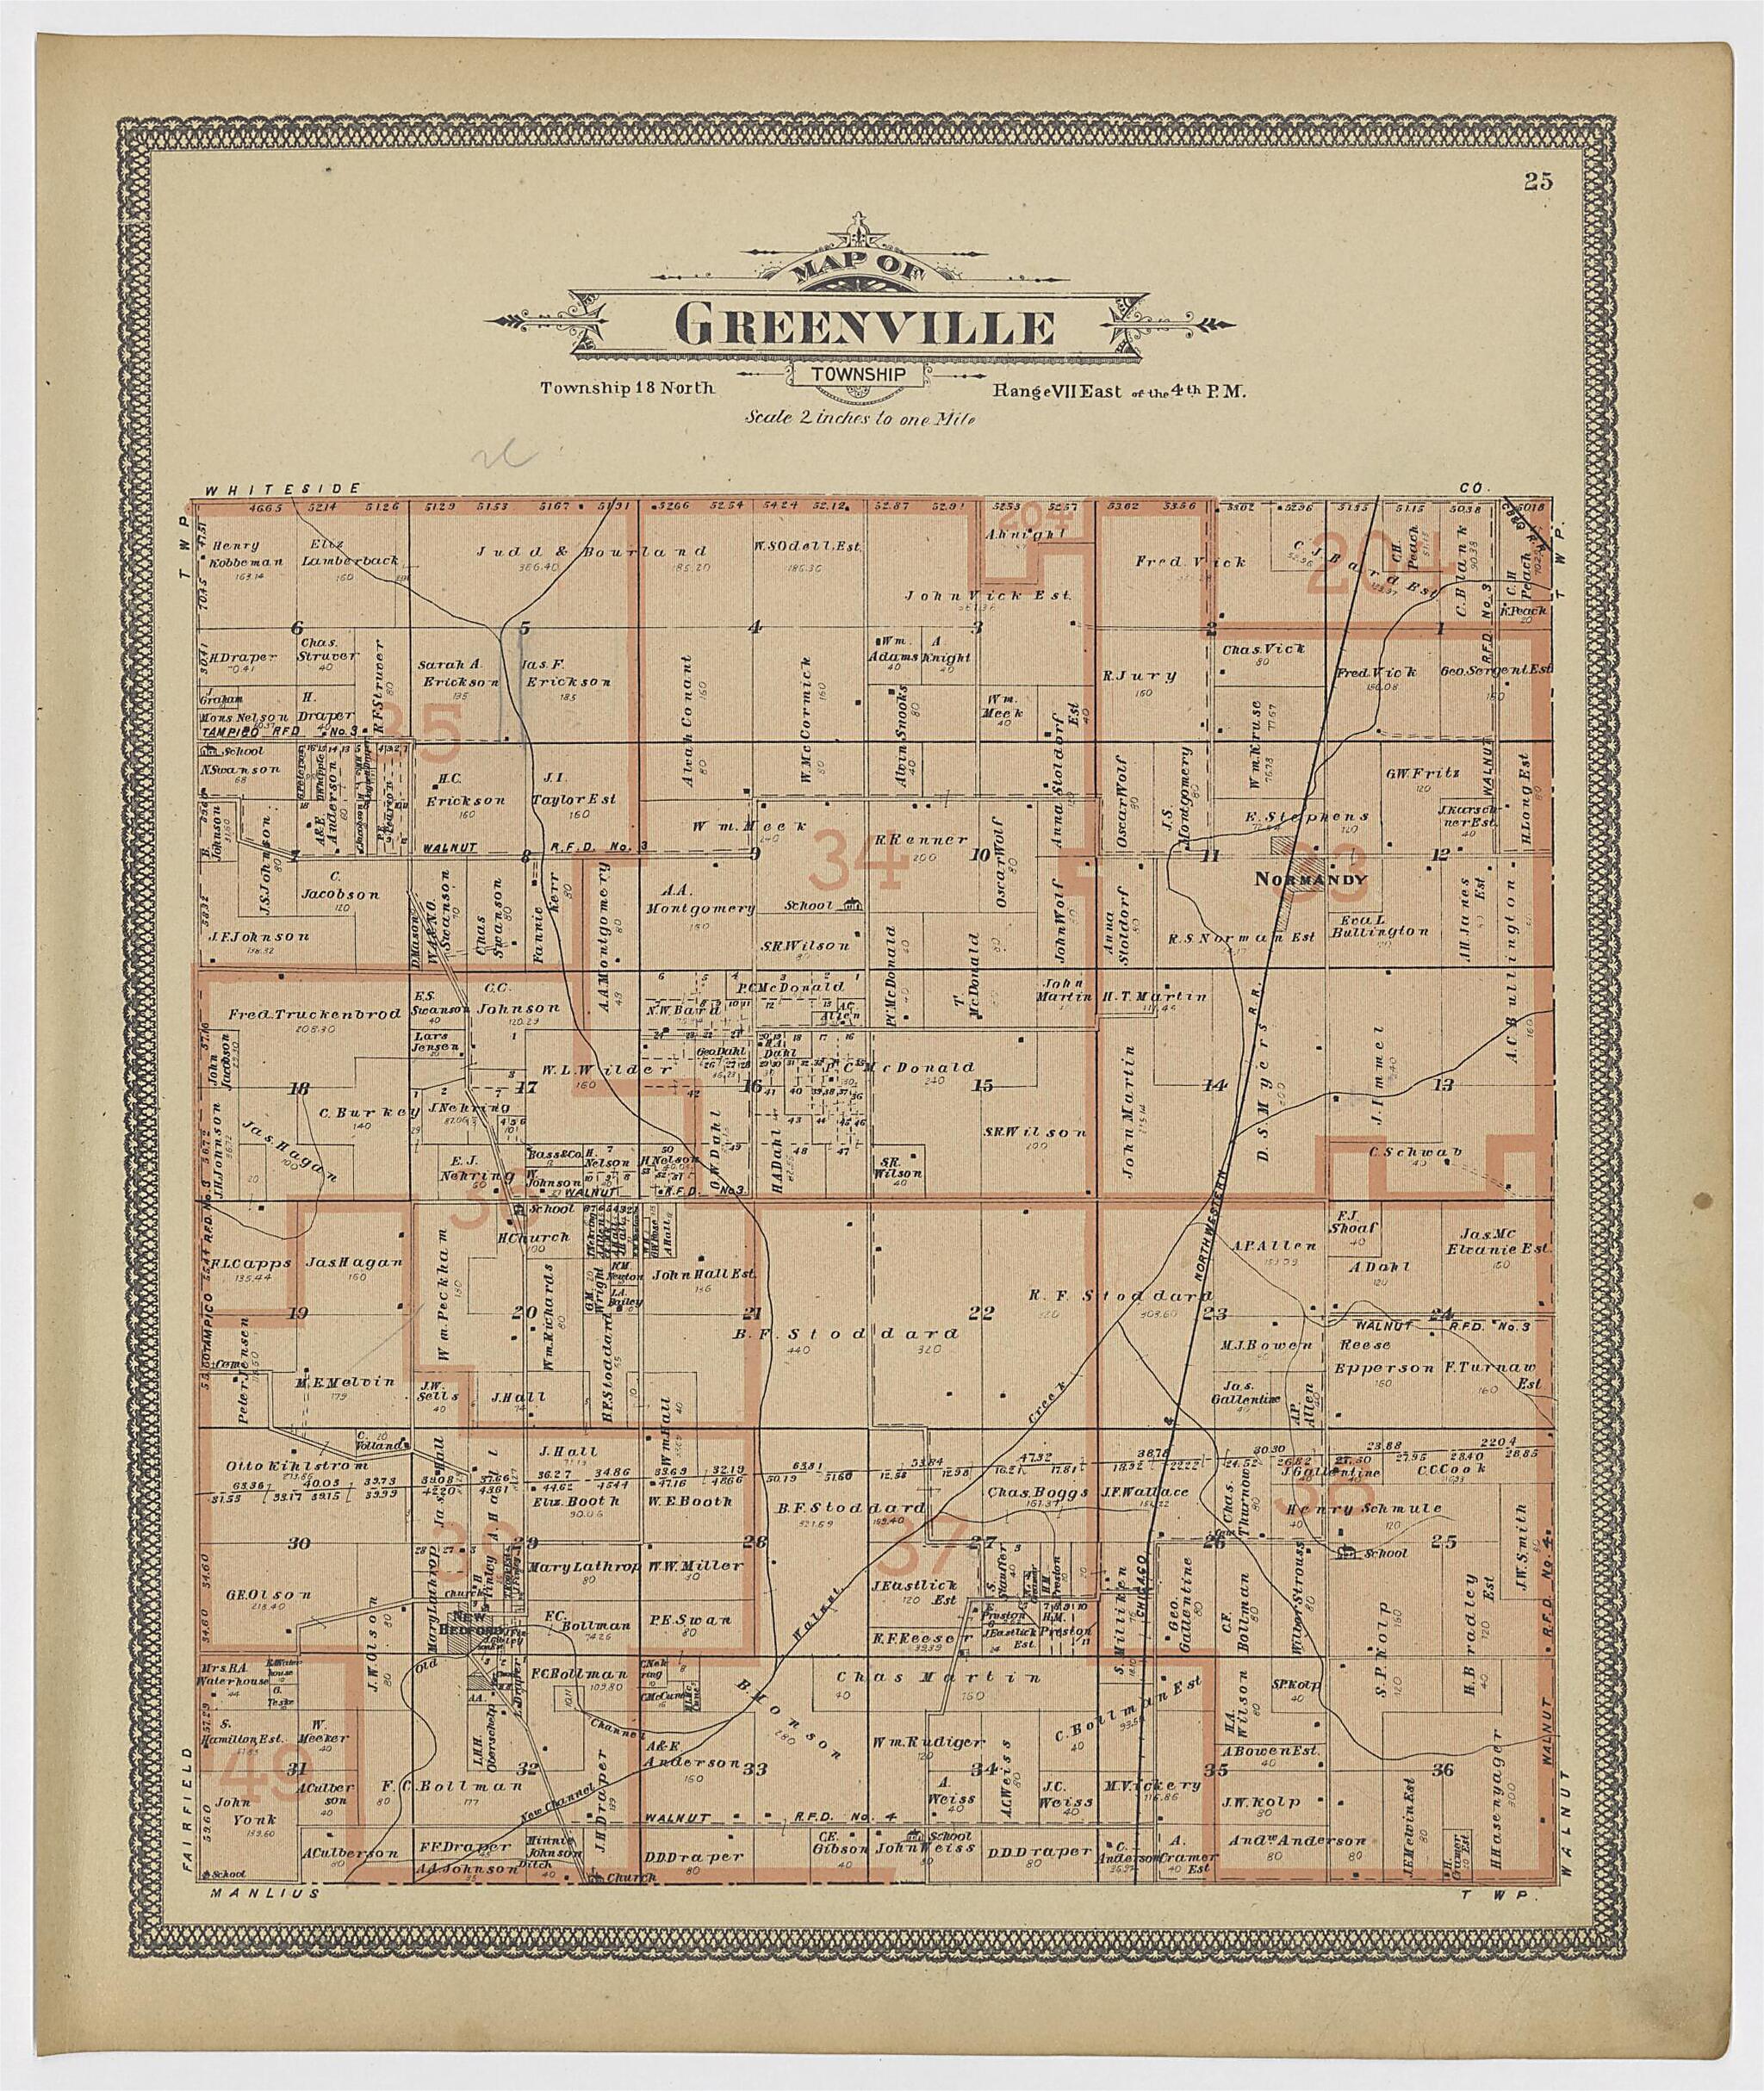 This old map of Image 14 of 20th Century Atlas of Bureau County, Illinois from Atlas of Bureau County, Illinois from 1905 was created by  Middle-West Publishing Co in 1905